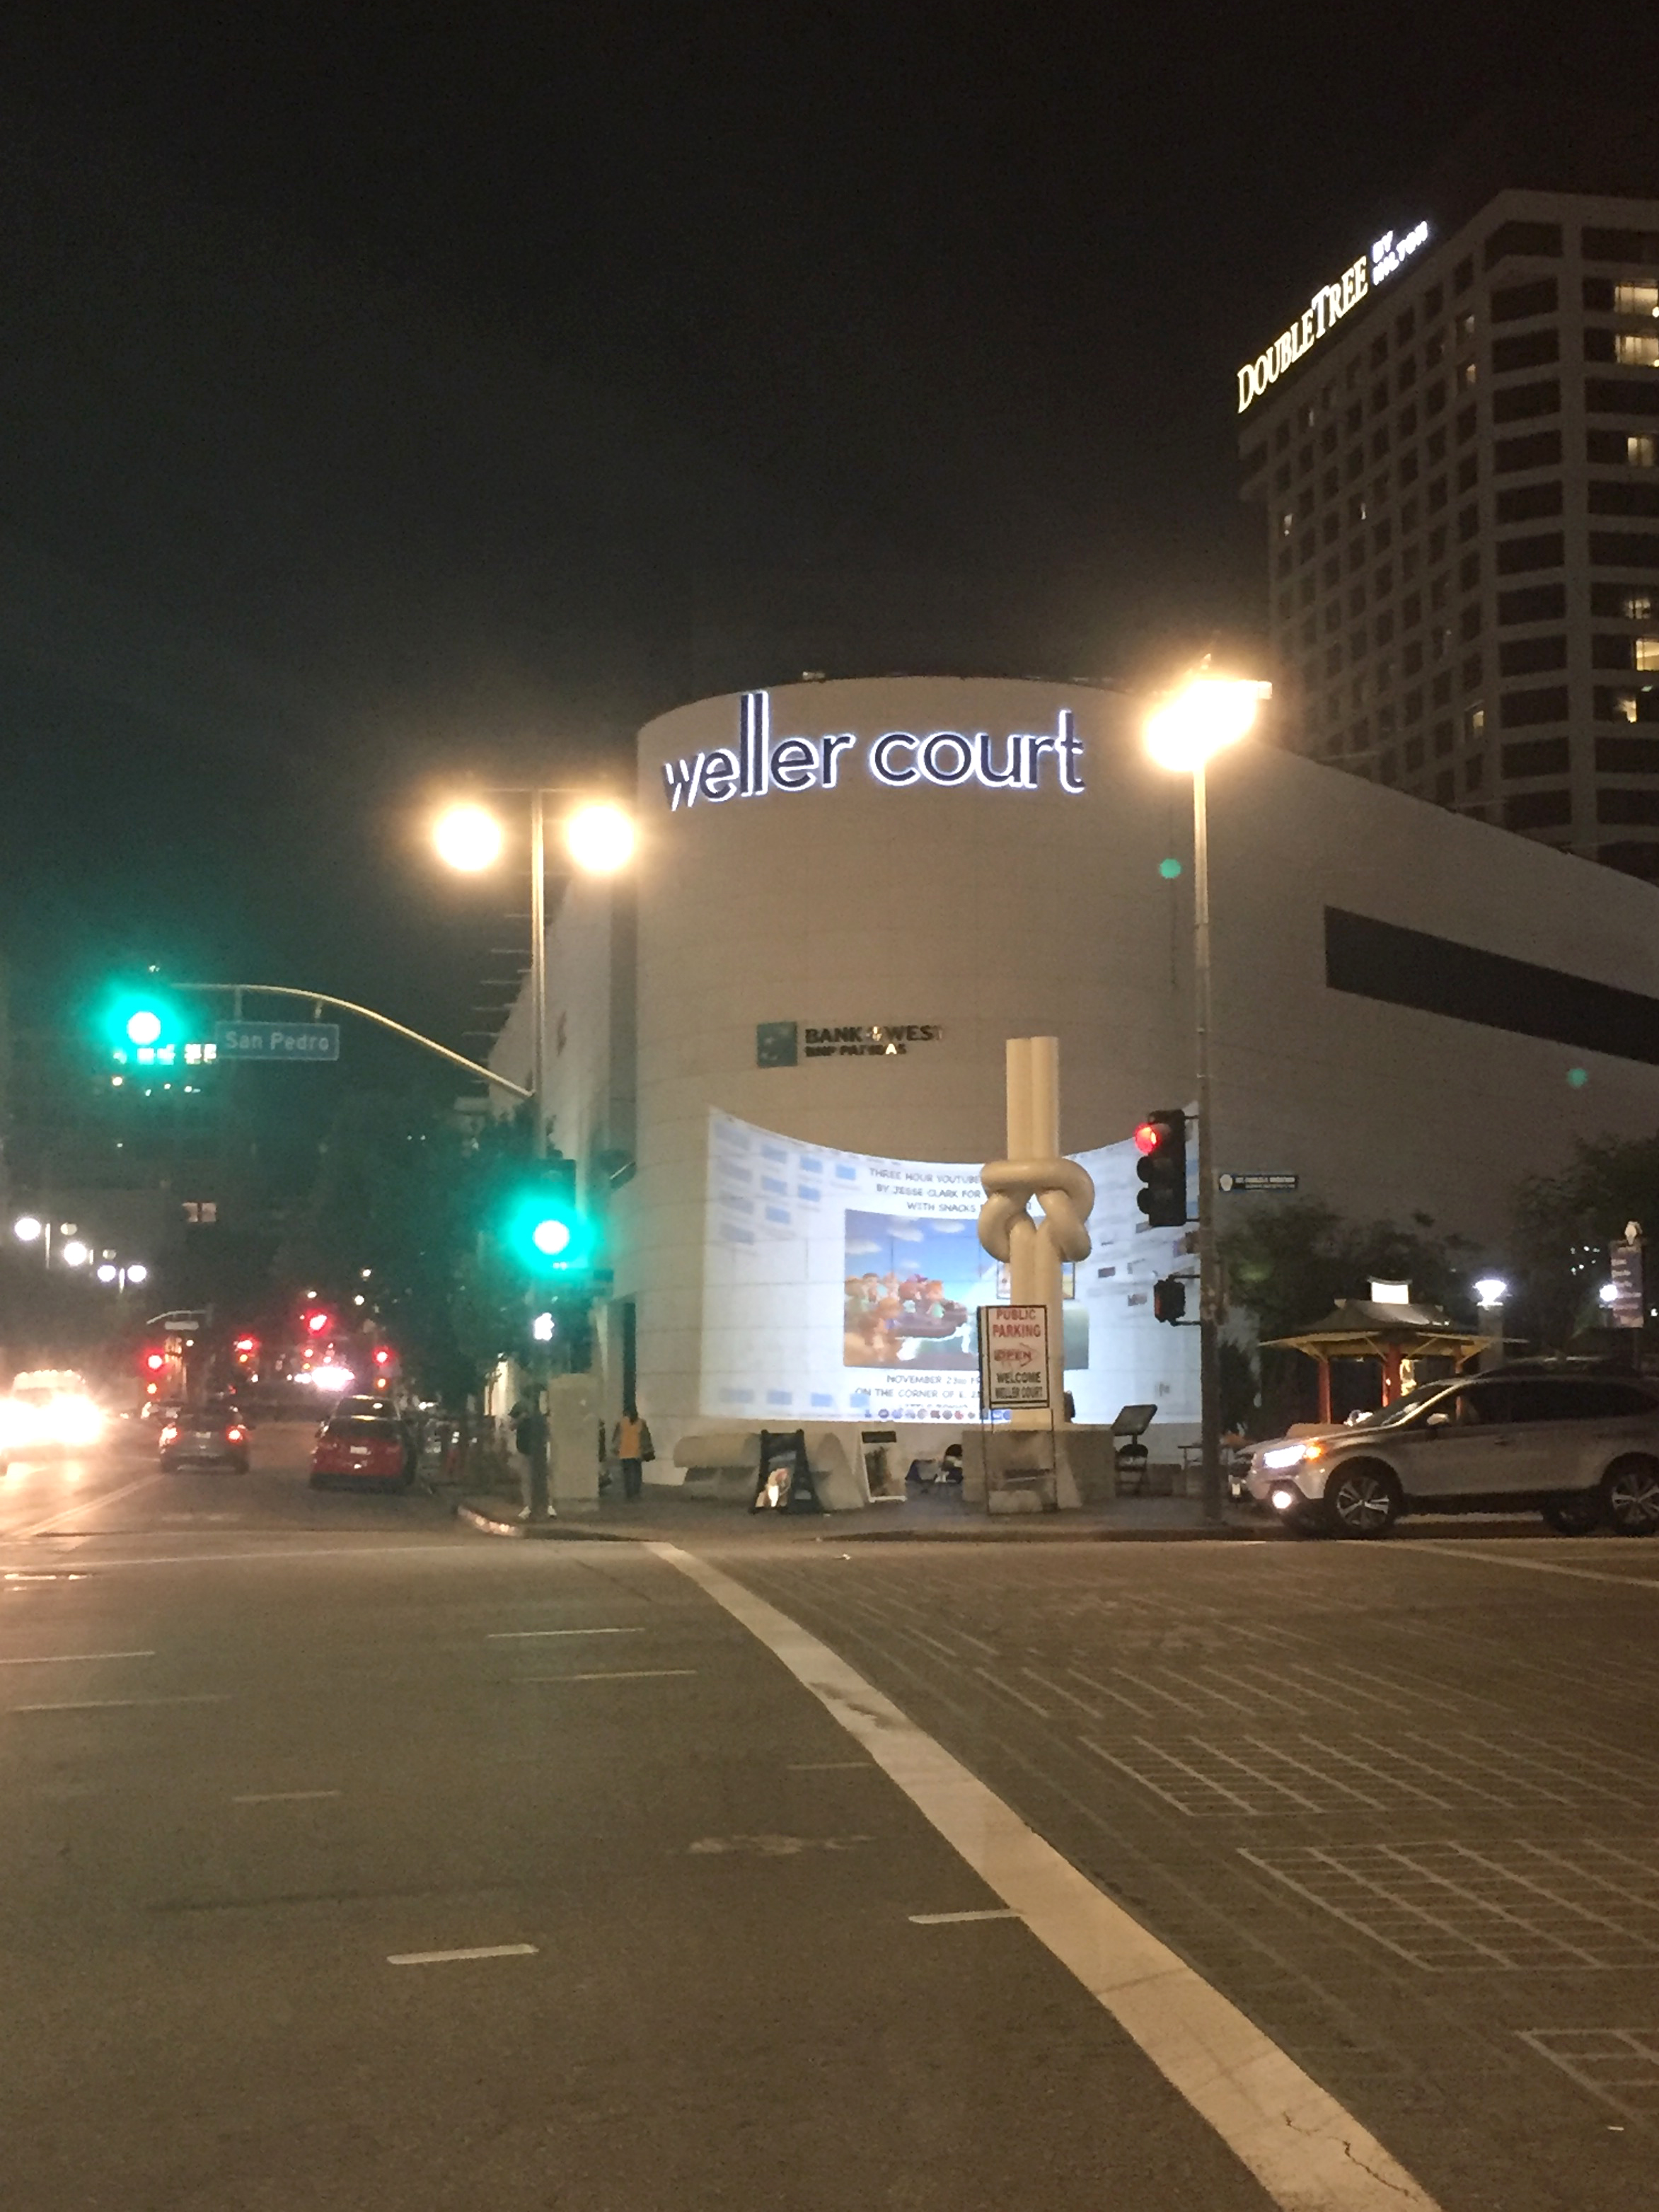 A corner in Little Tokyo, Los Angeles with a projection on a bank building